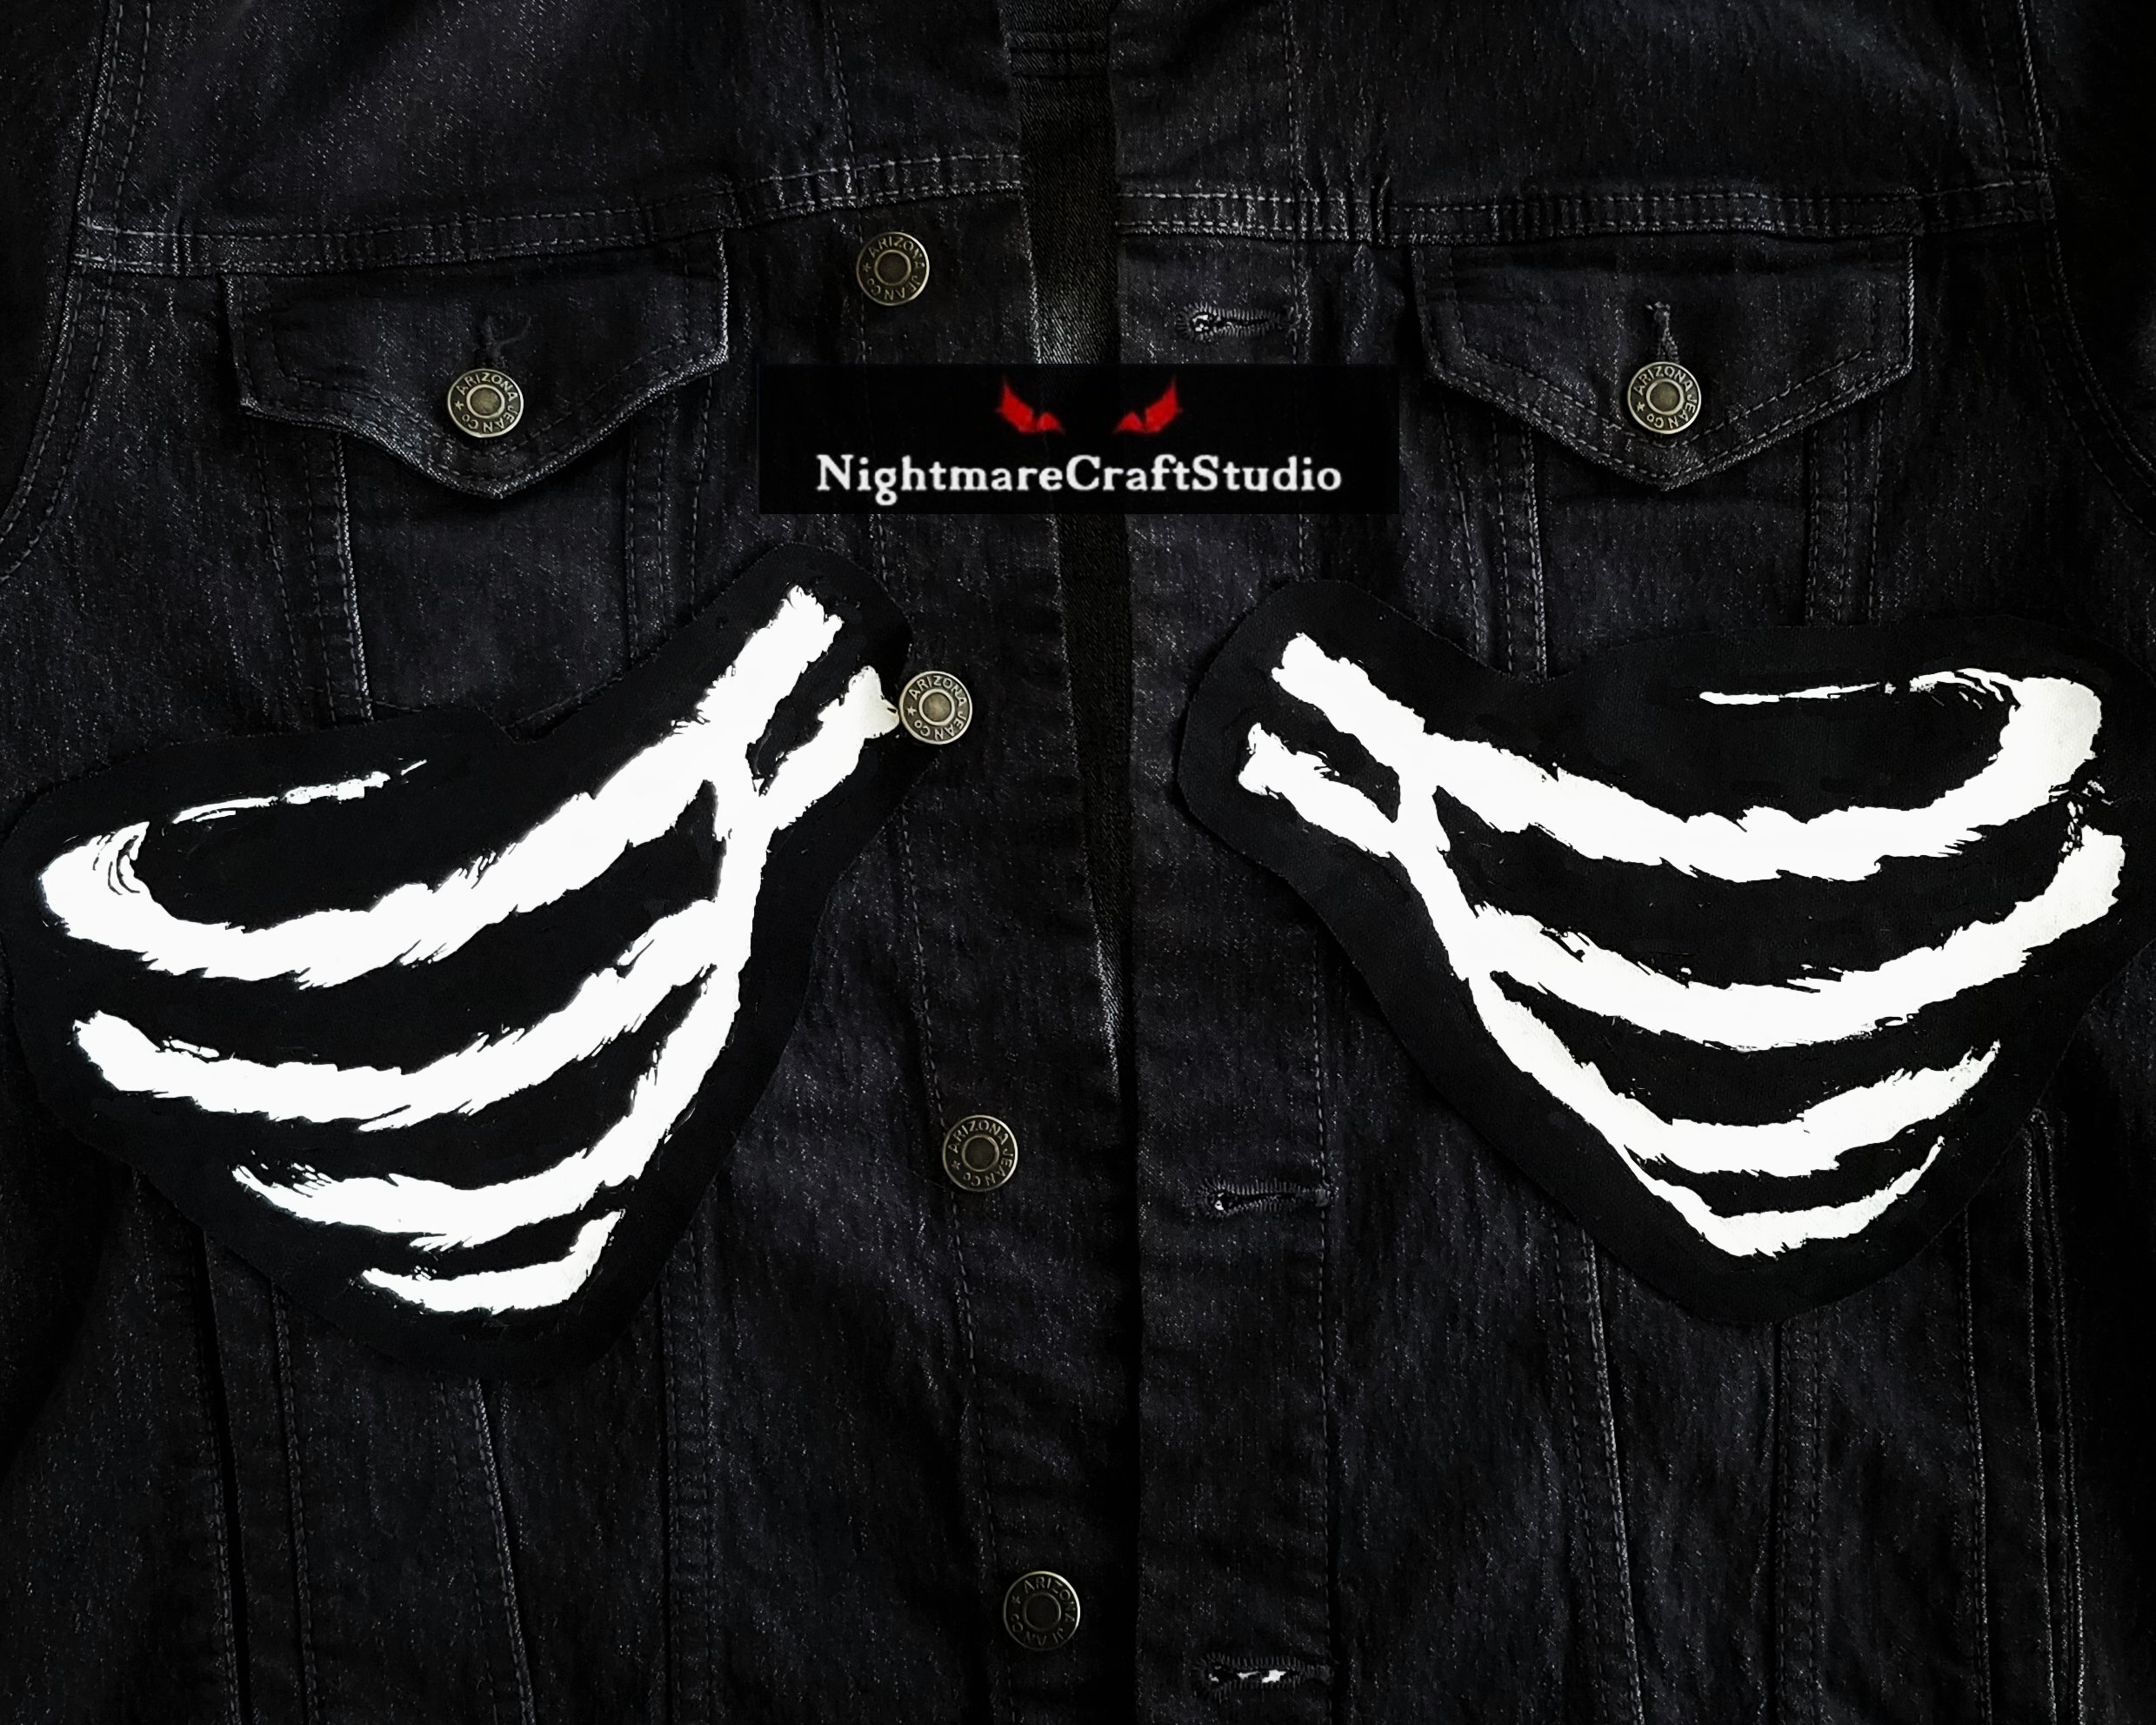 11 Custom Patches for Jackets Side Rocker Patch 